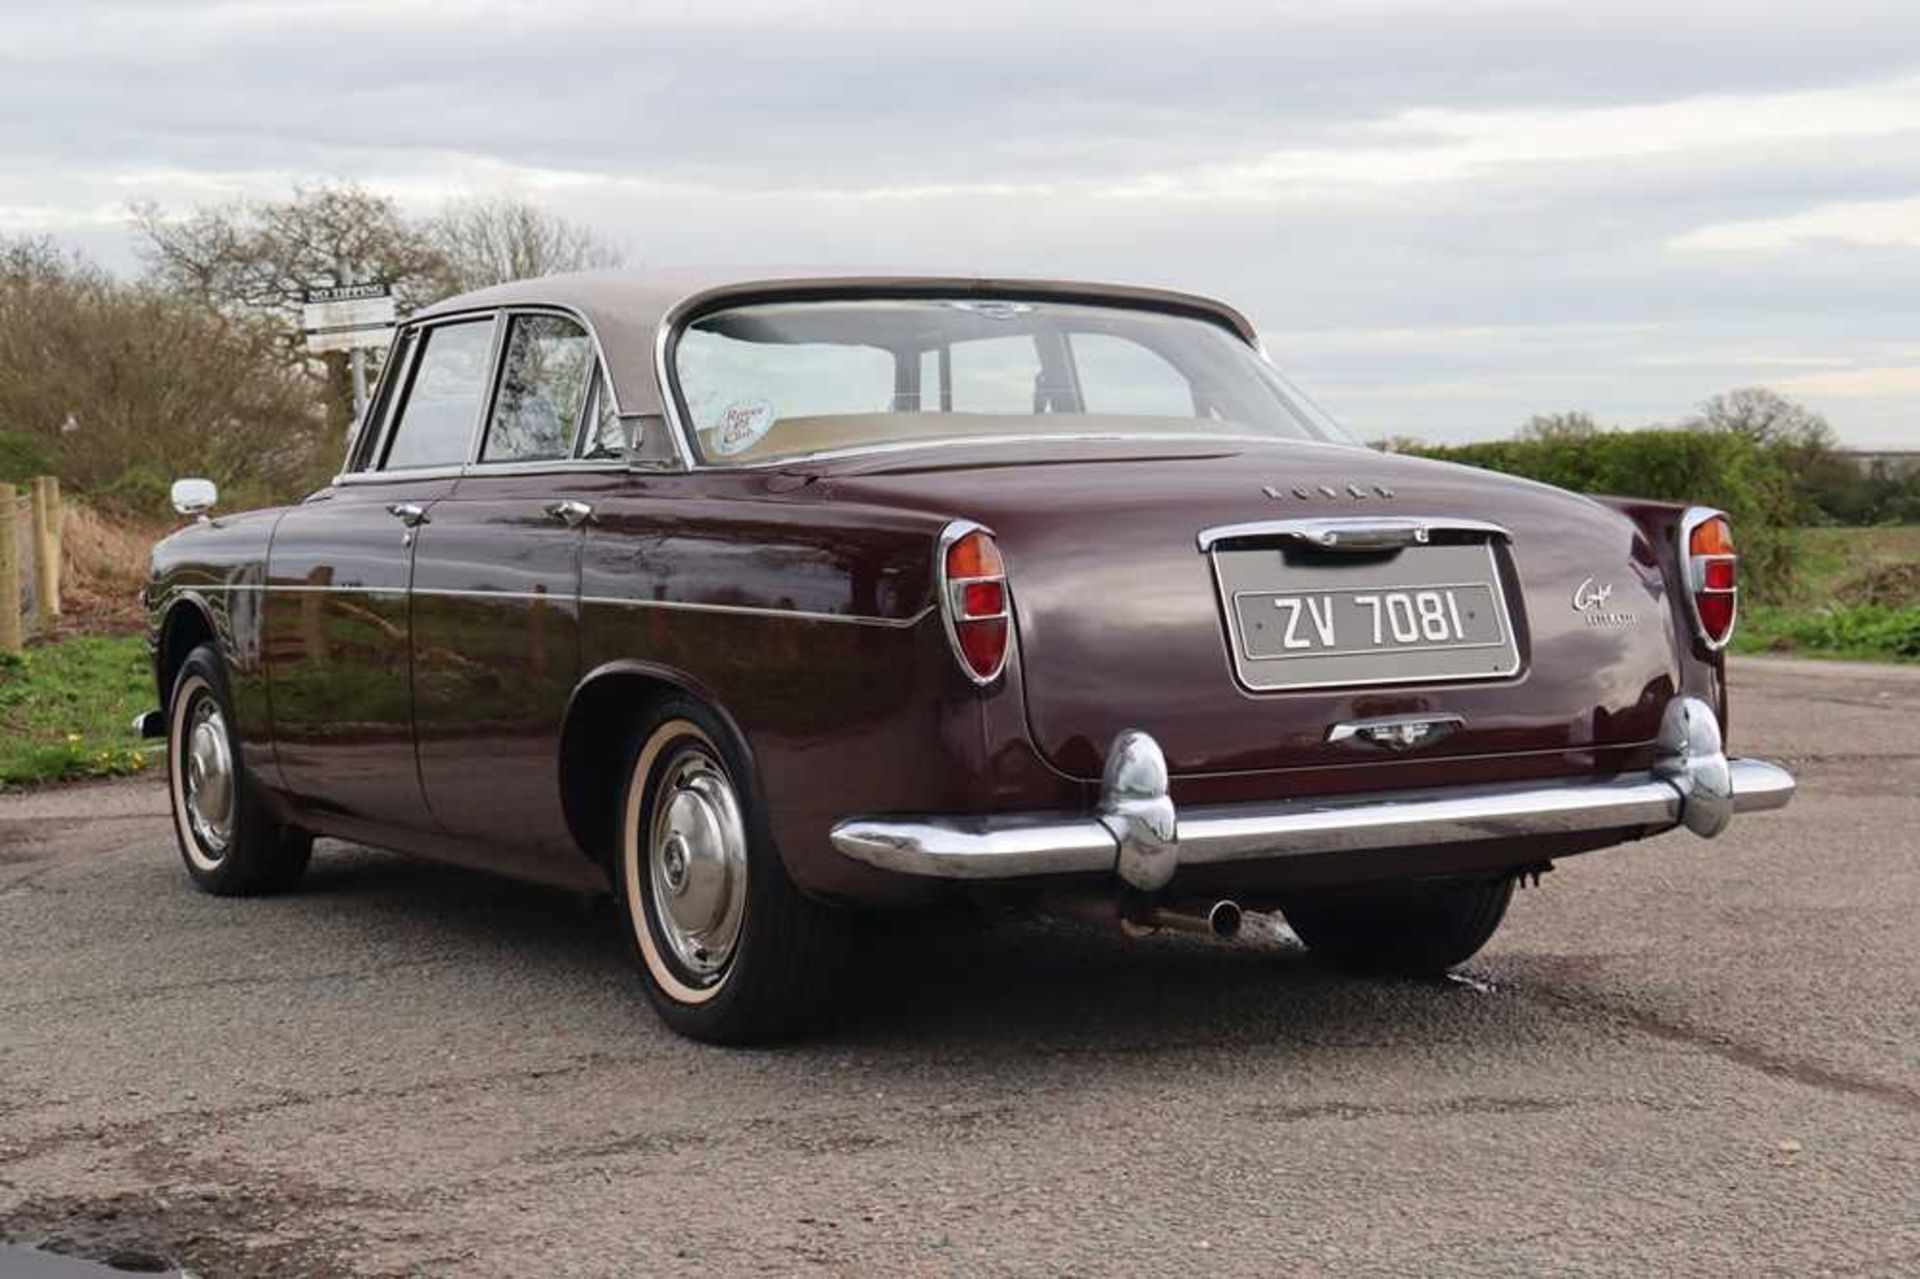 1964 Rover P5 3-Litre Coupe - Image 3 of 41